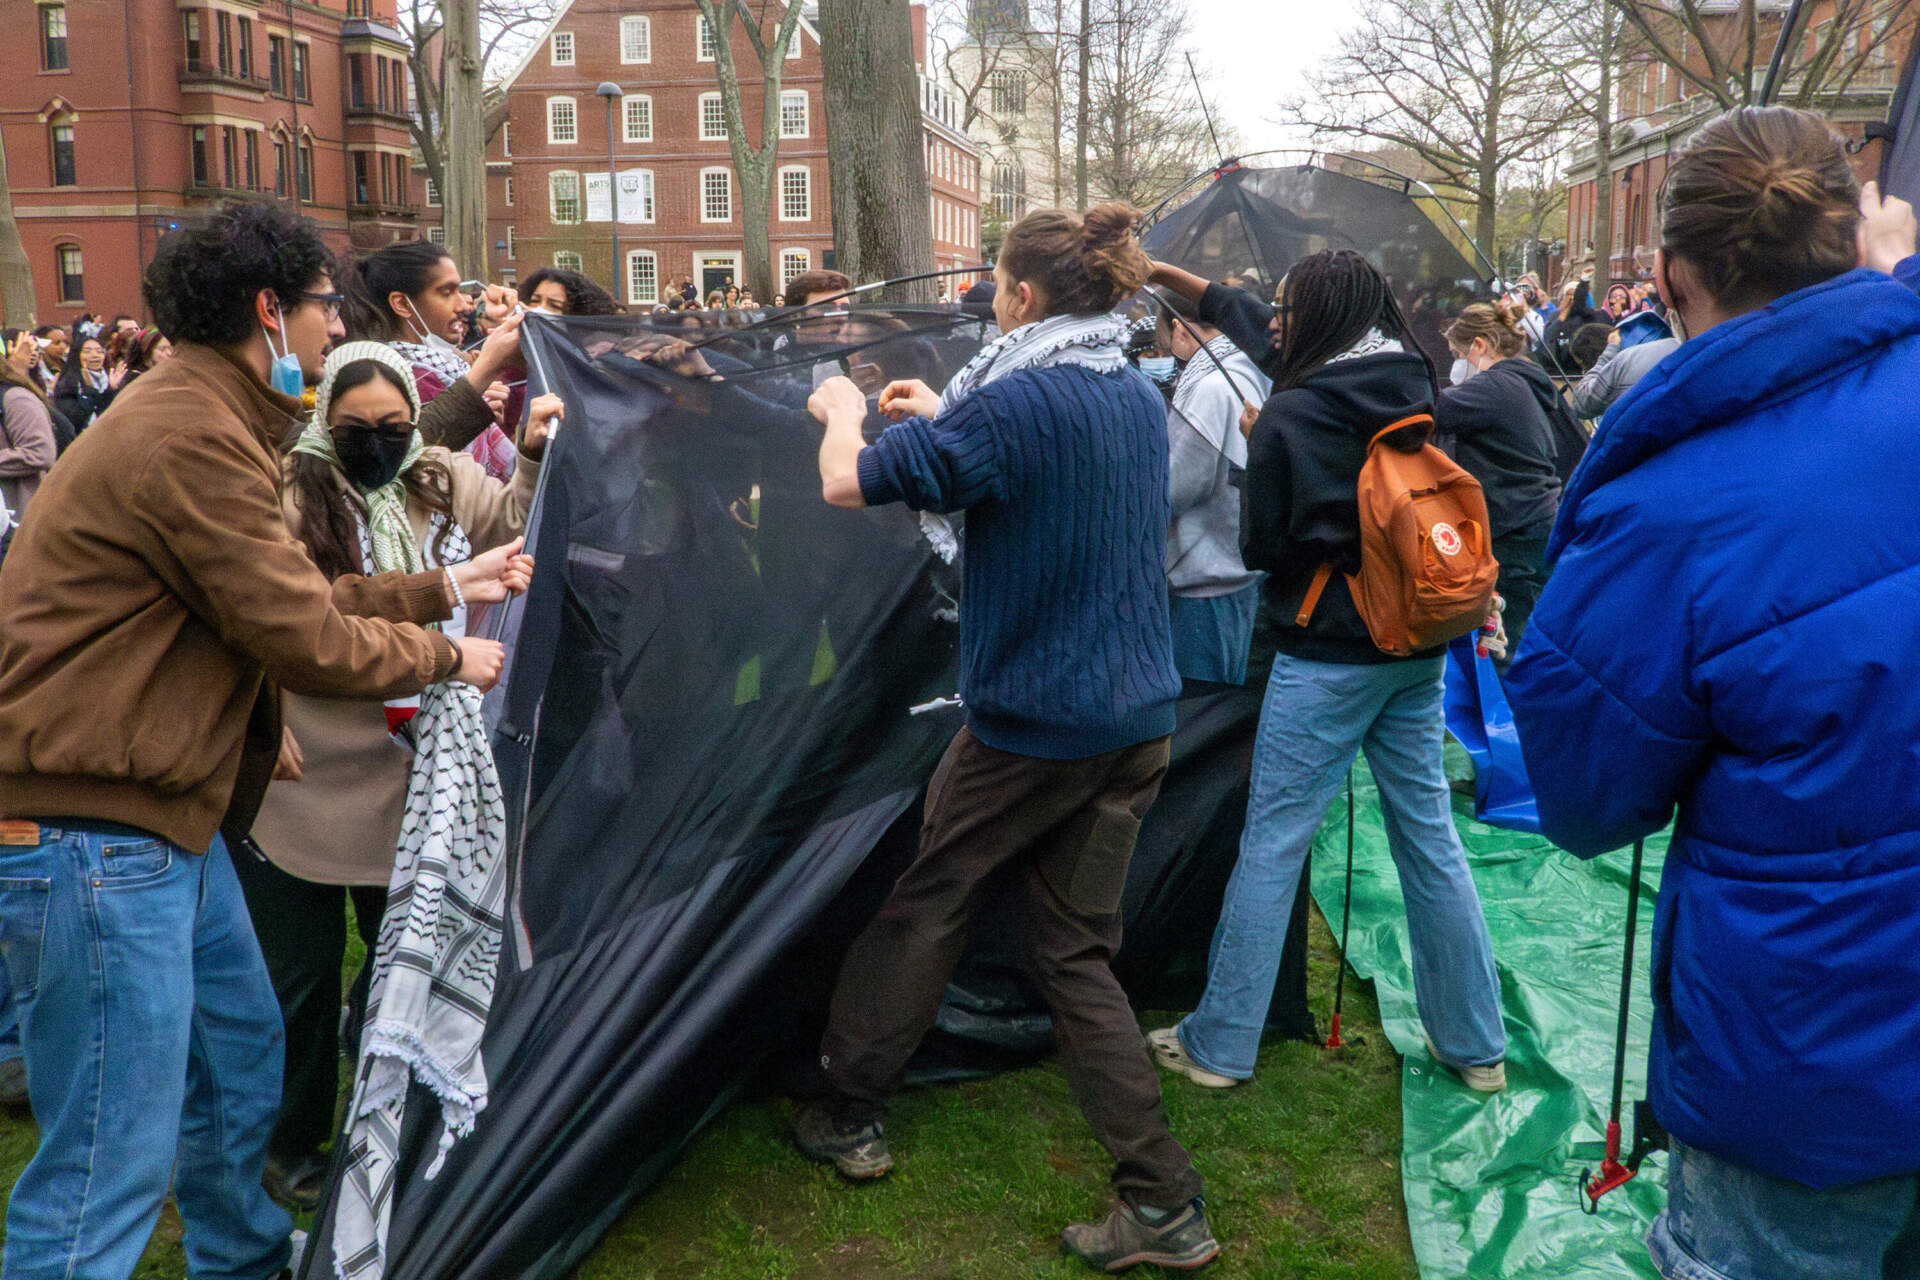 Protesters calling for a ceasefire in Gaza set up tents in Harvard Yard Wednesday afternoon. (Max Larkin/WBUR)